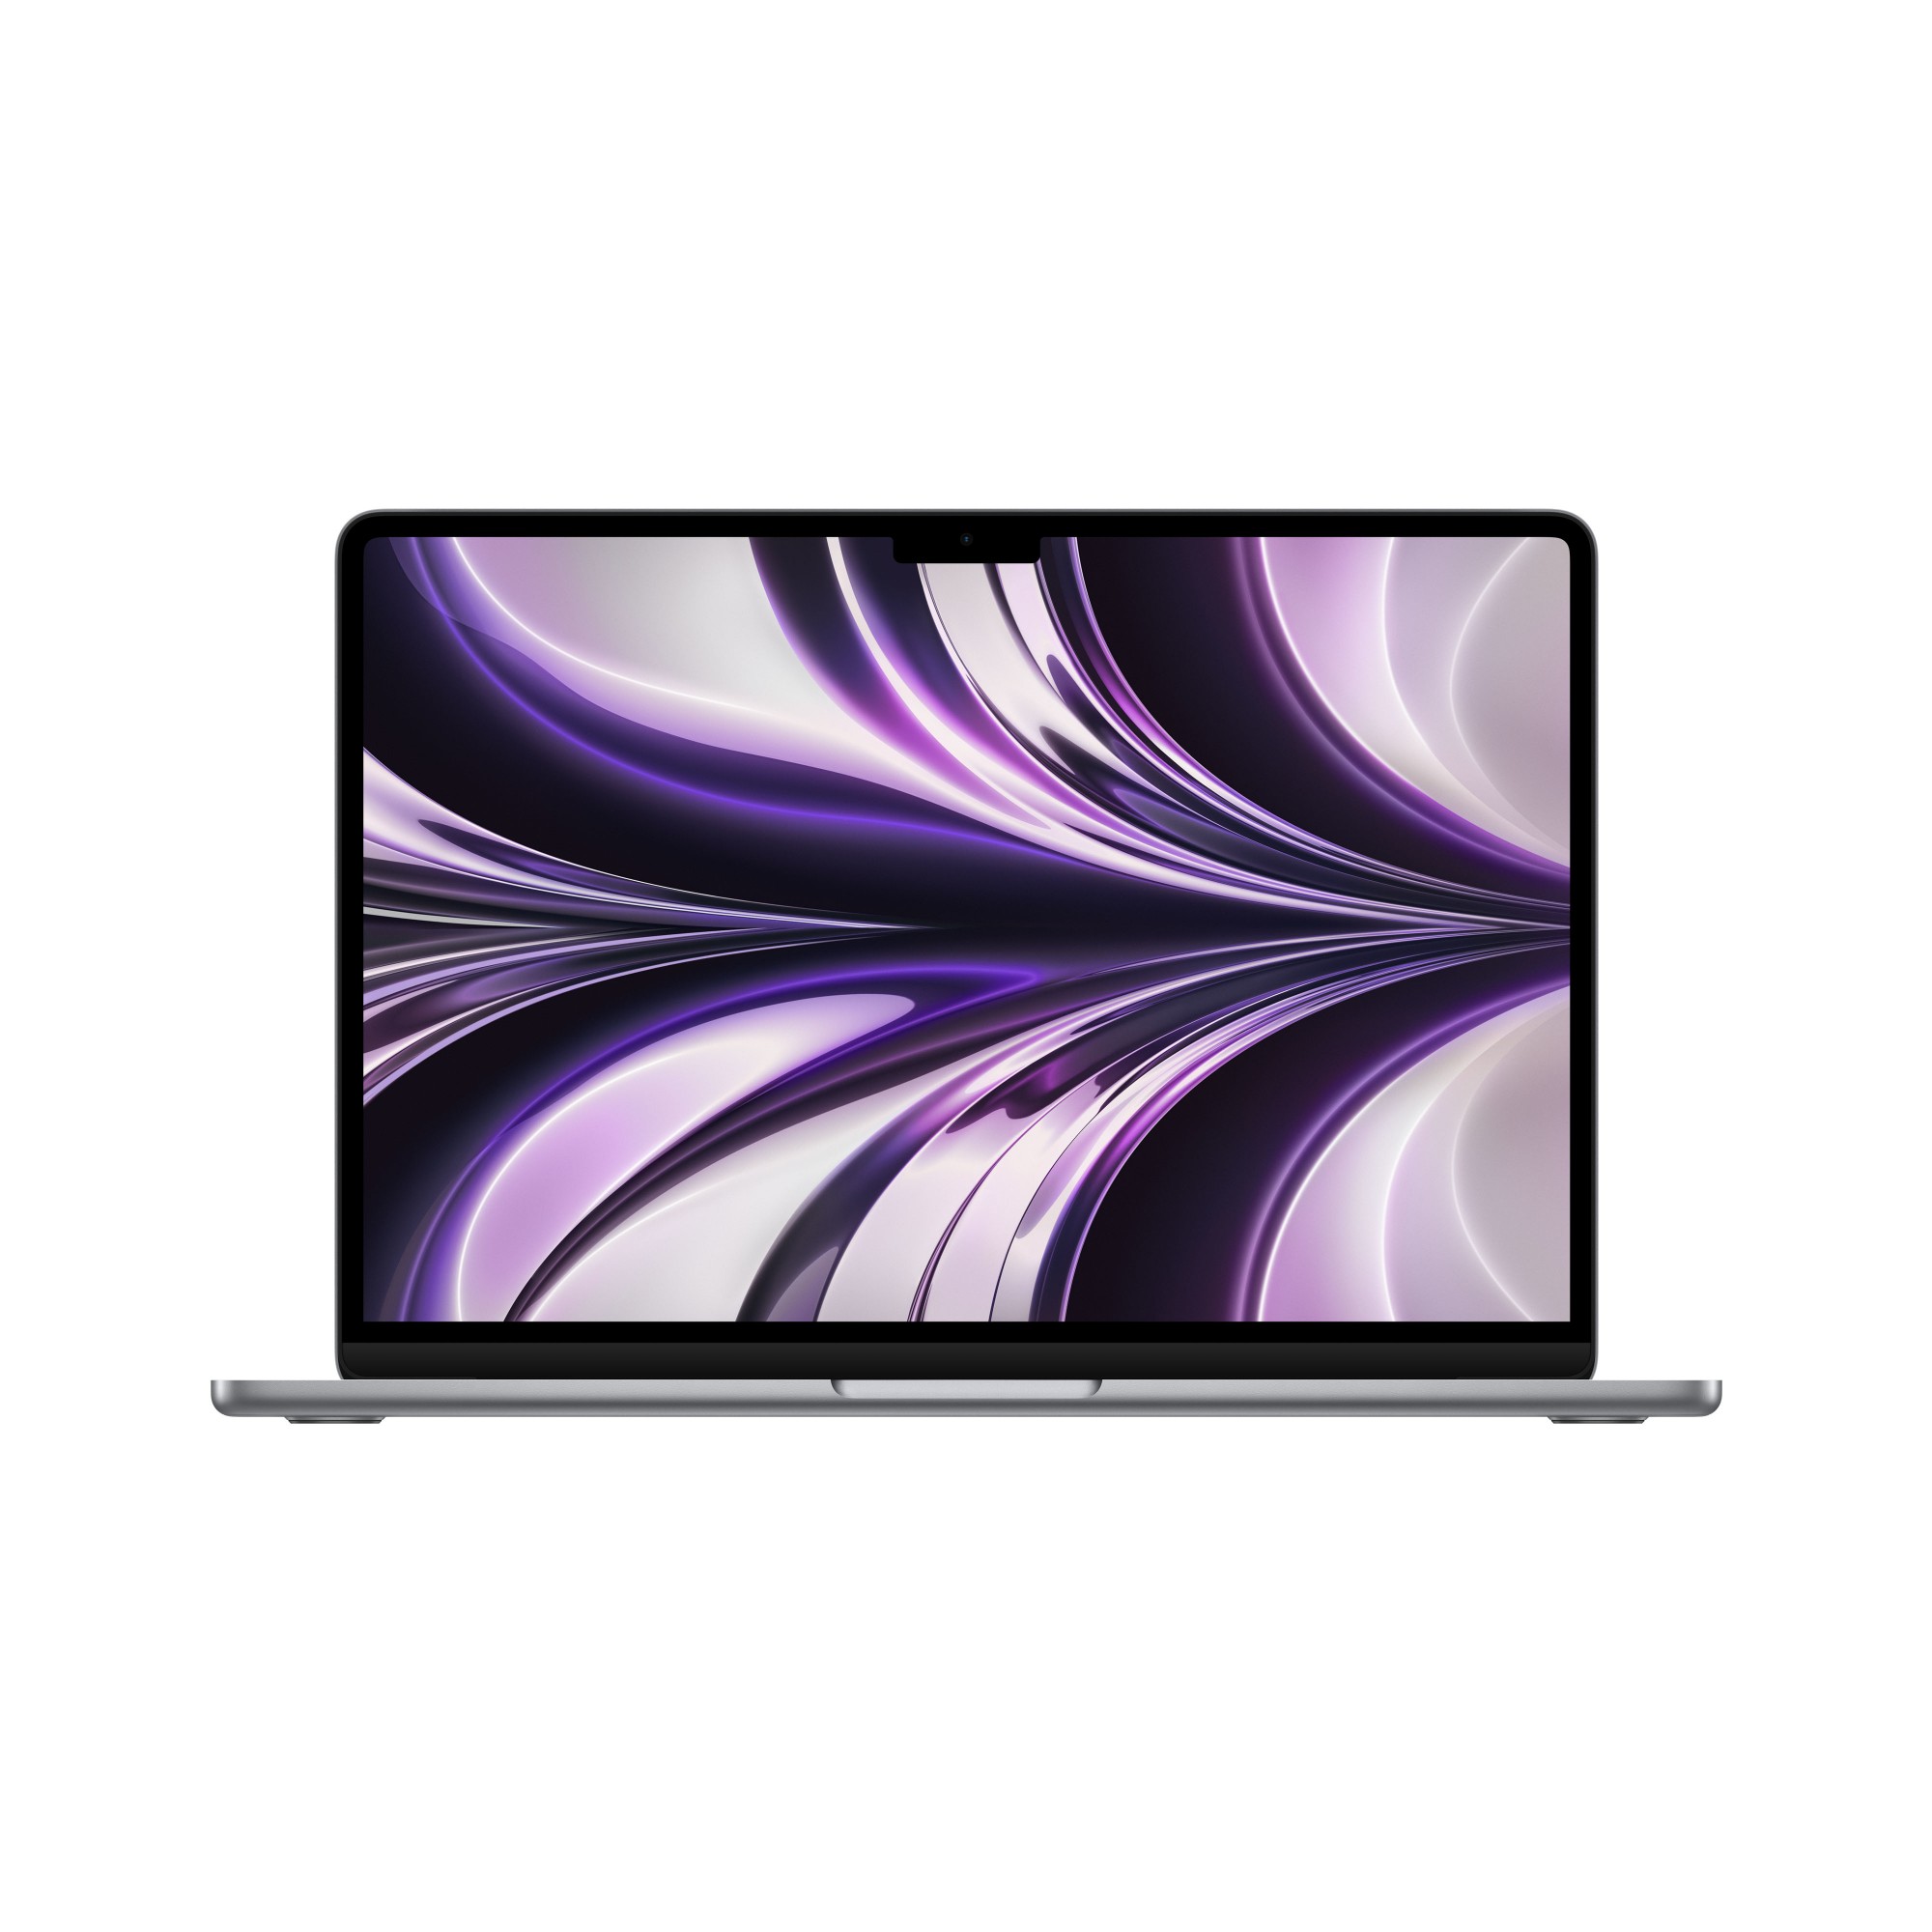 MacBook Air M2, 13", Space Grey, Apple M2 chip with 8-Core CPU, 10-Core GPU, 16-Core Neural Engine, 8GB unified memory, 512GB SSD storage, Backlit Magic Keyboard - British, 35W Dual USB-C Port Power Adapter UK Power Supply